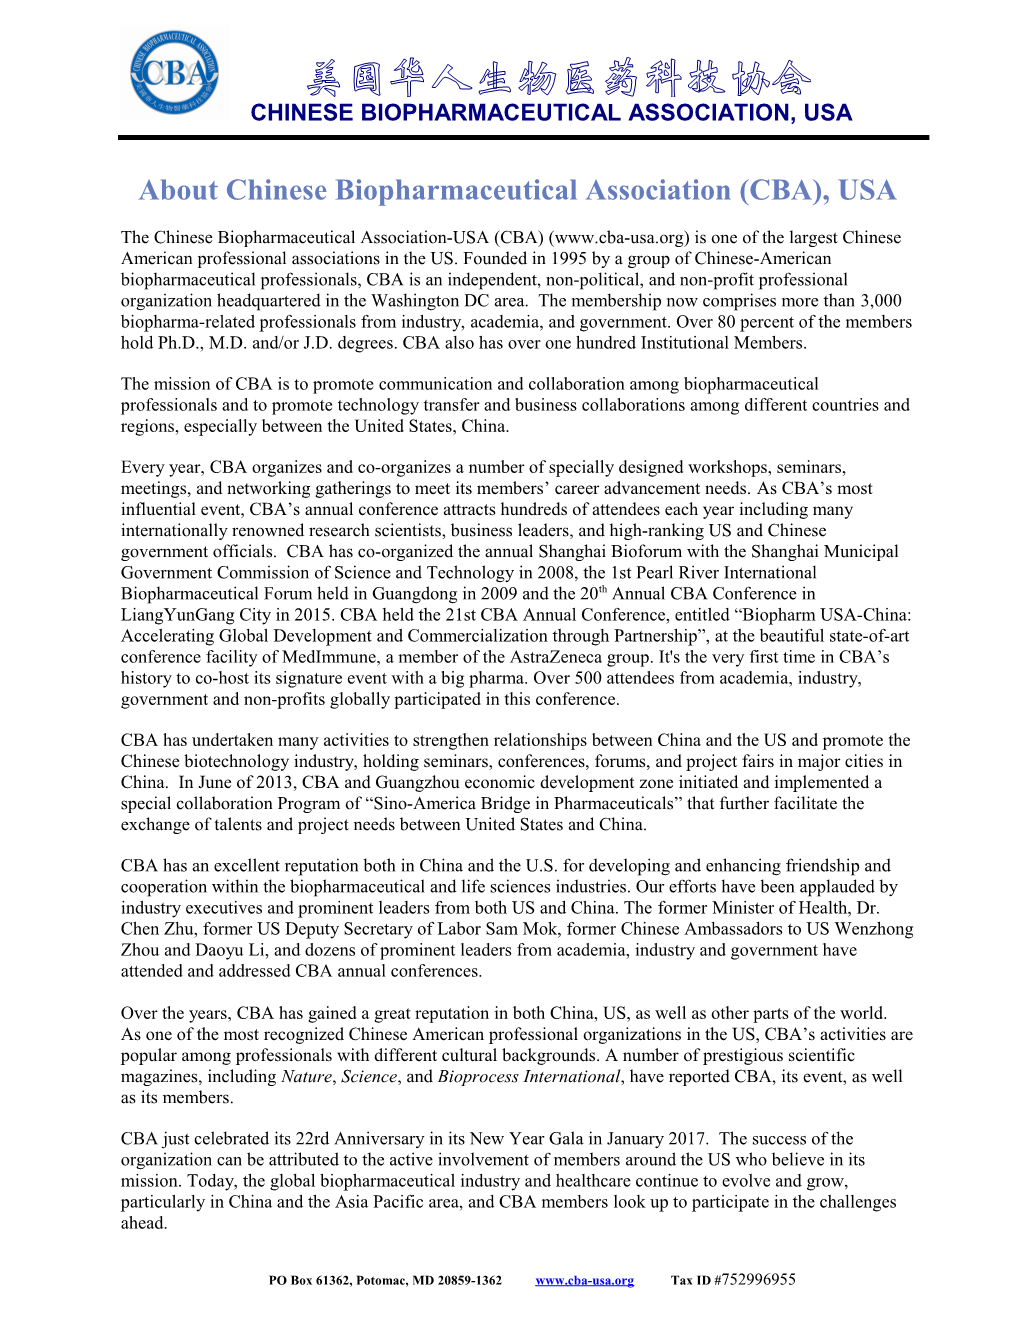 About Chinese Biopharmaceutical Association (CBA), USA